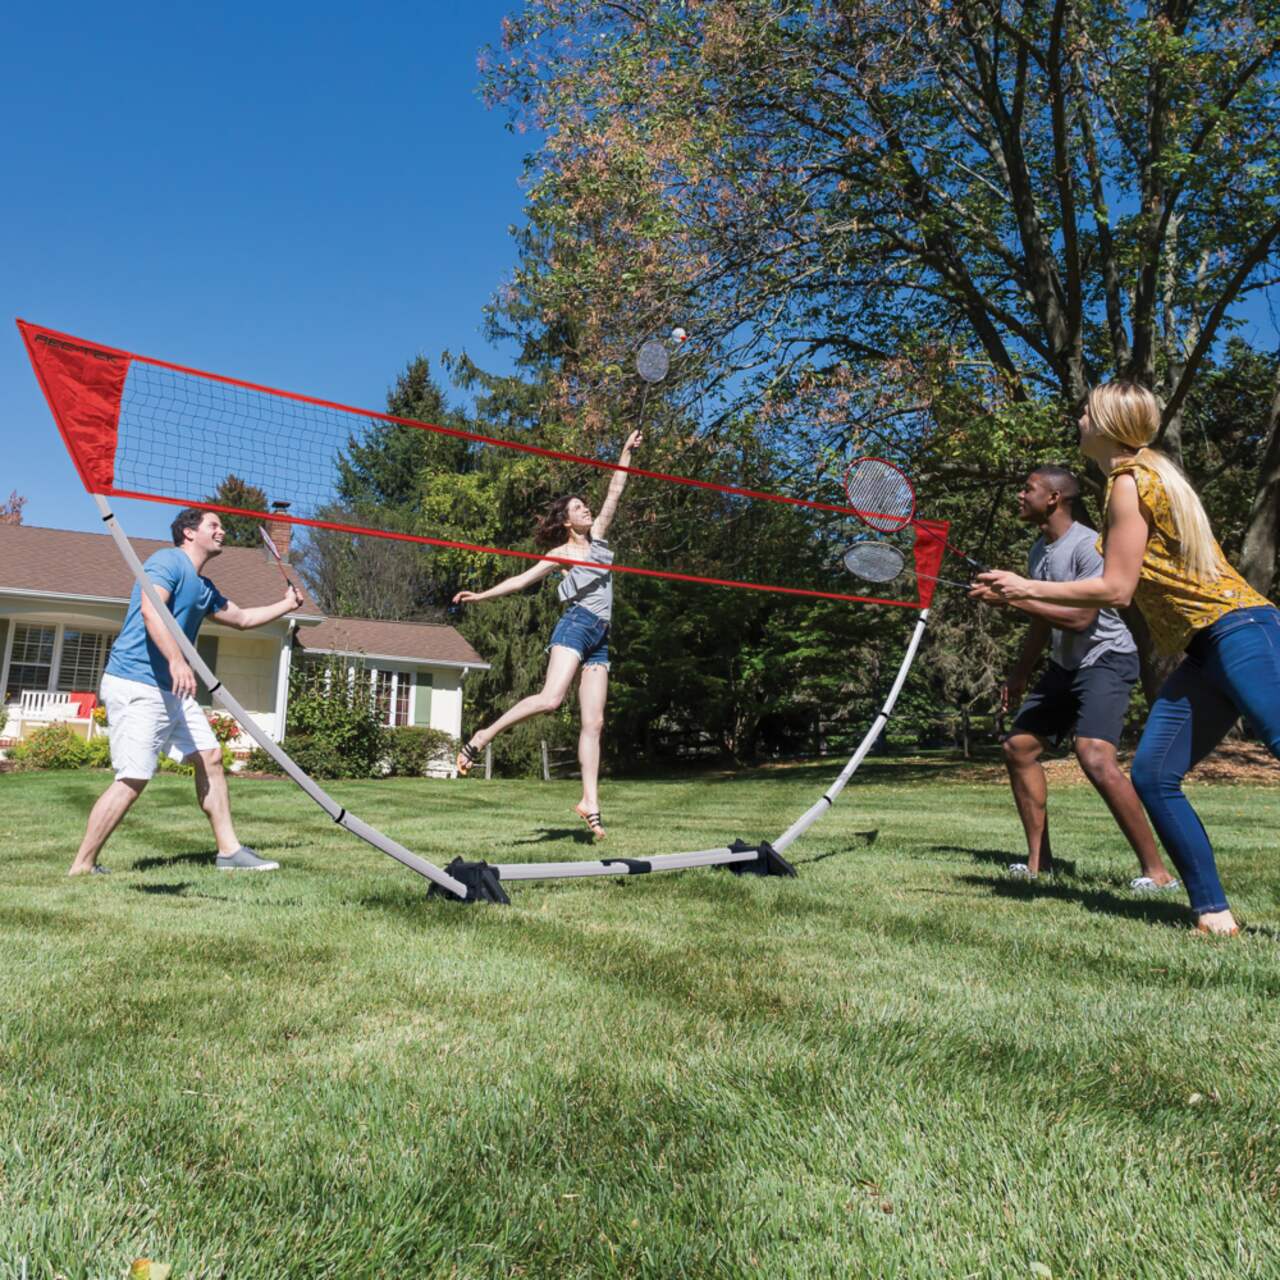 Portable Badminton Net Set with Storage Base, Rackets LED Lightning  Shuttlecocks Combo Set for Family and Kids, Easy Setup for Backyard  Training, Beach, Park, Picnic Games in the Sports Equipment department at